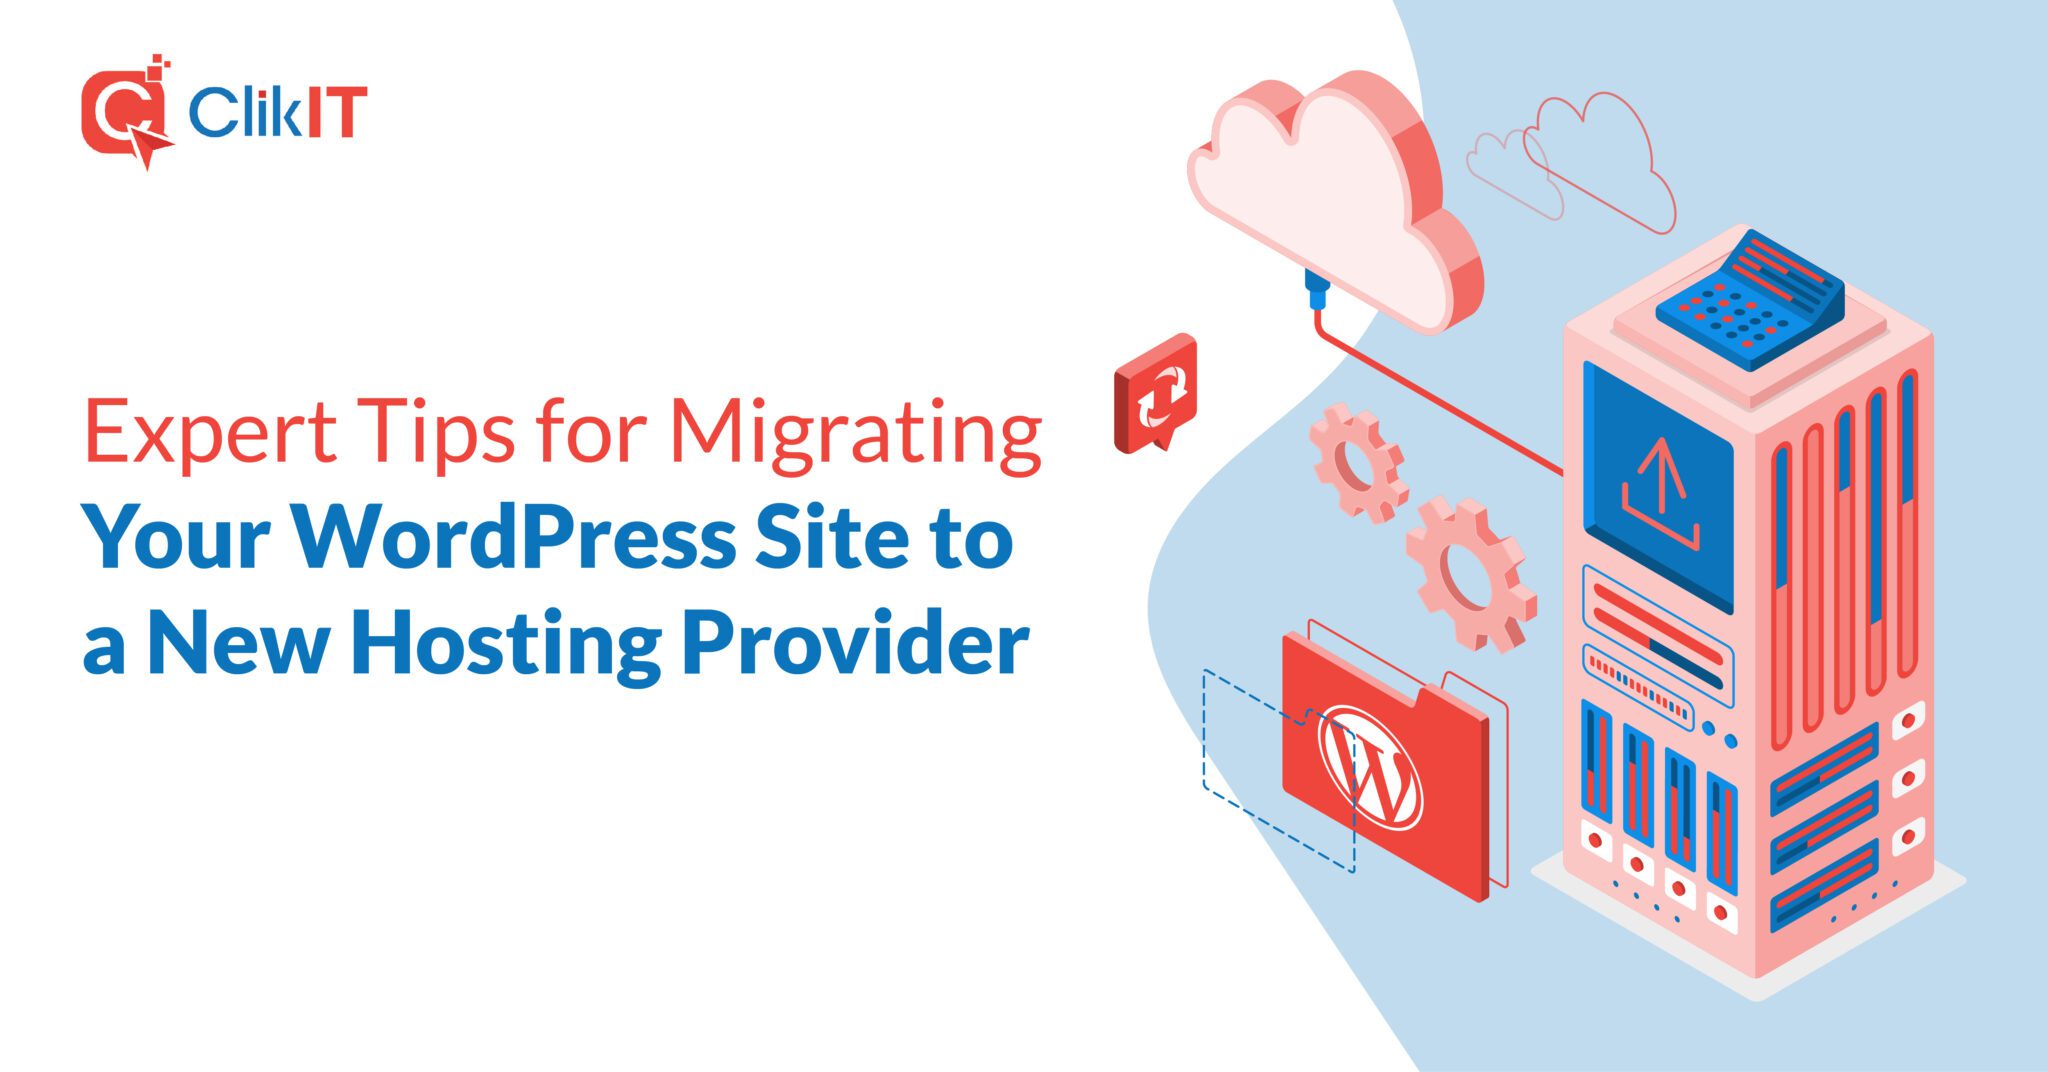 Expert Tips for Migrating Your WordPress Site to a New Hosting Provider